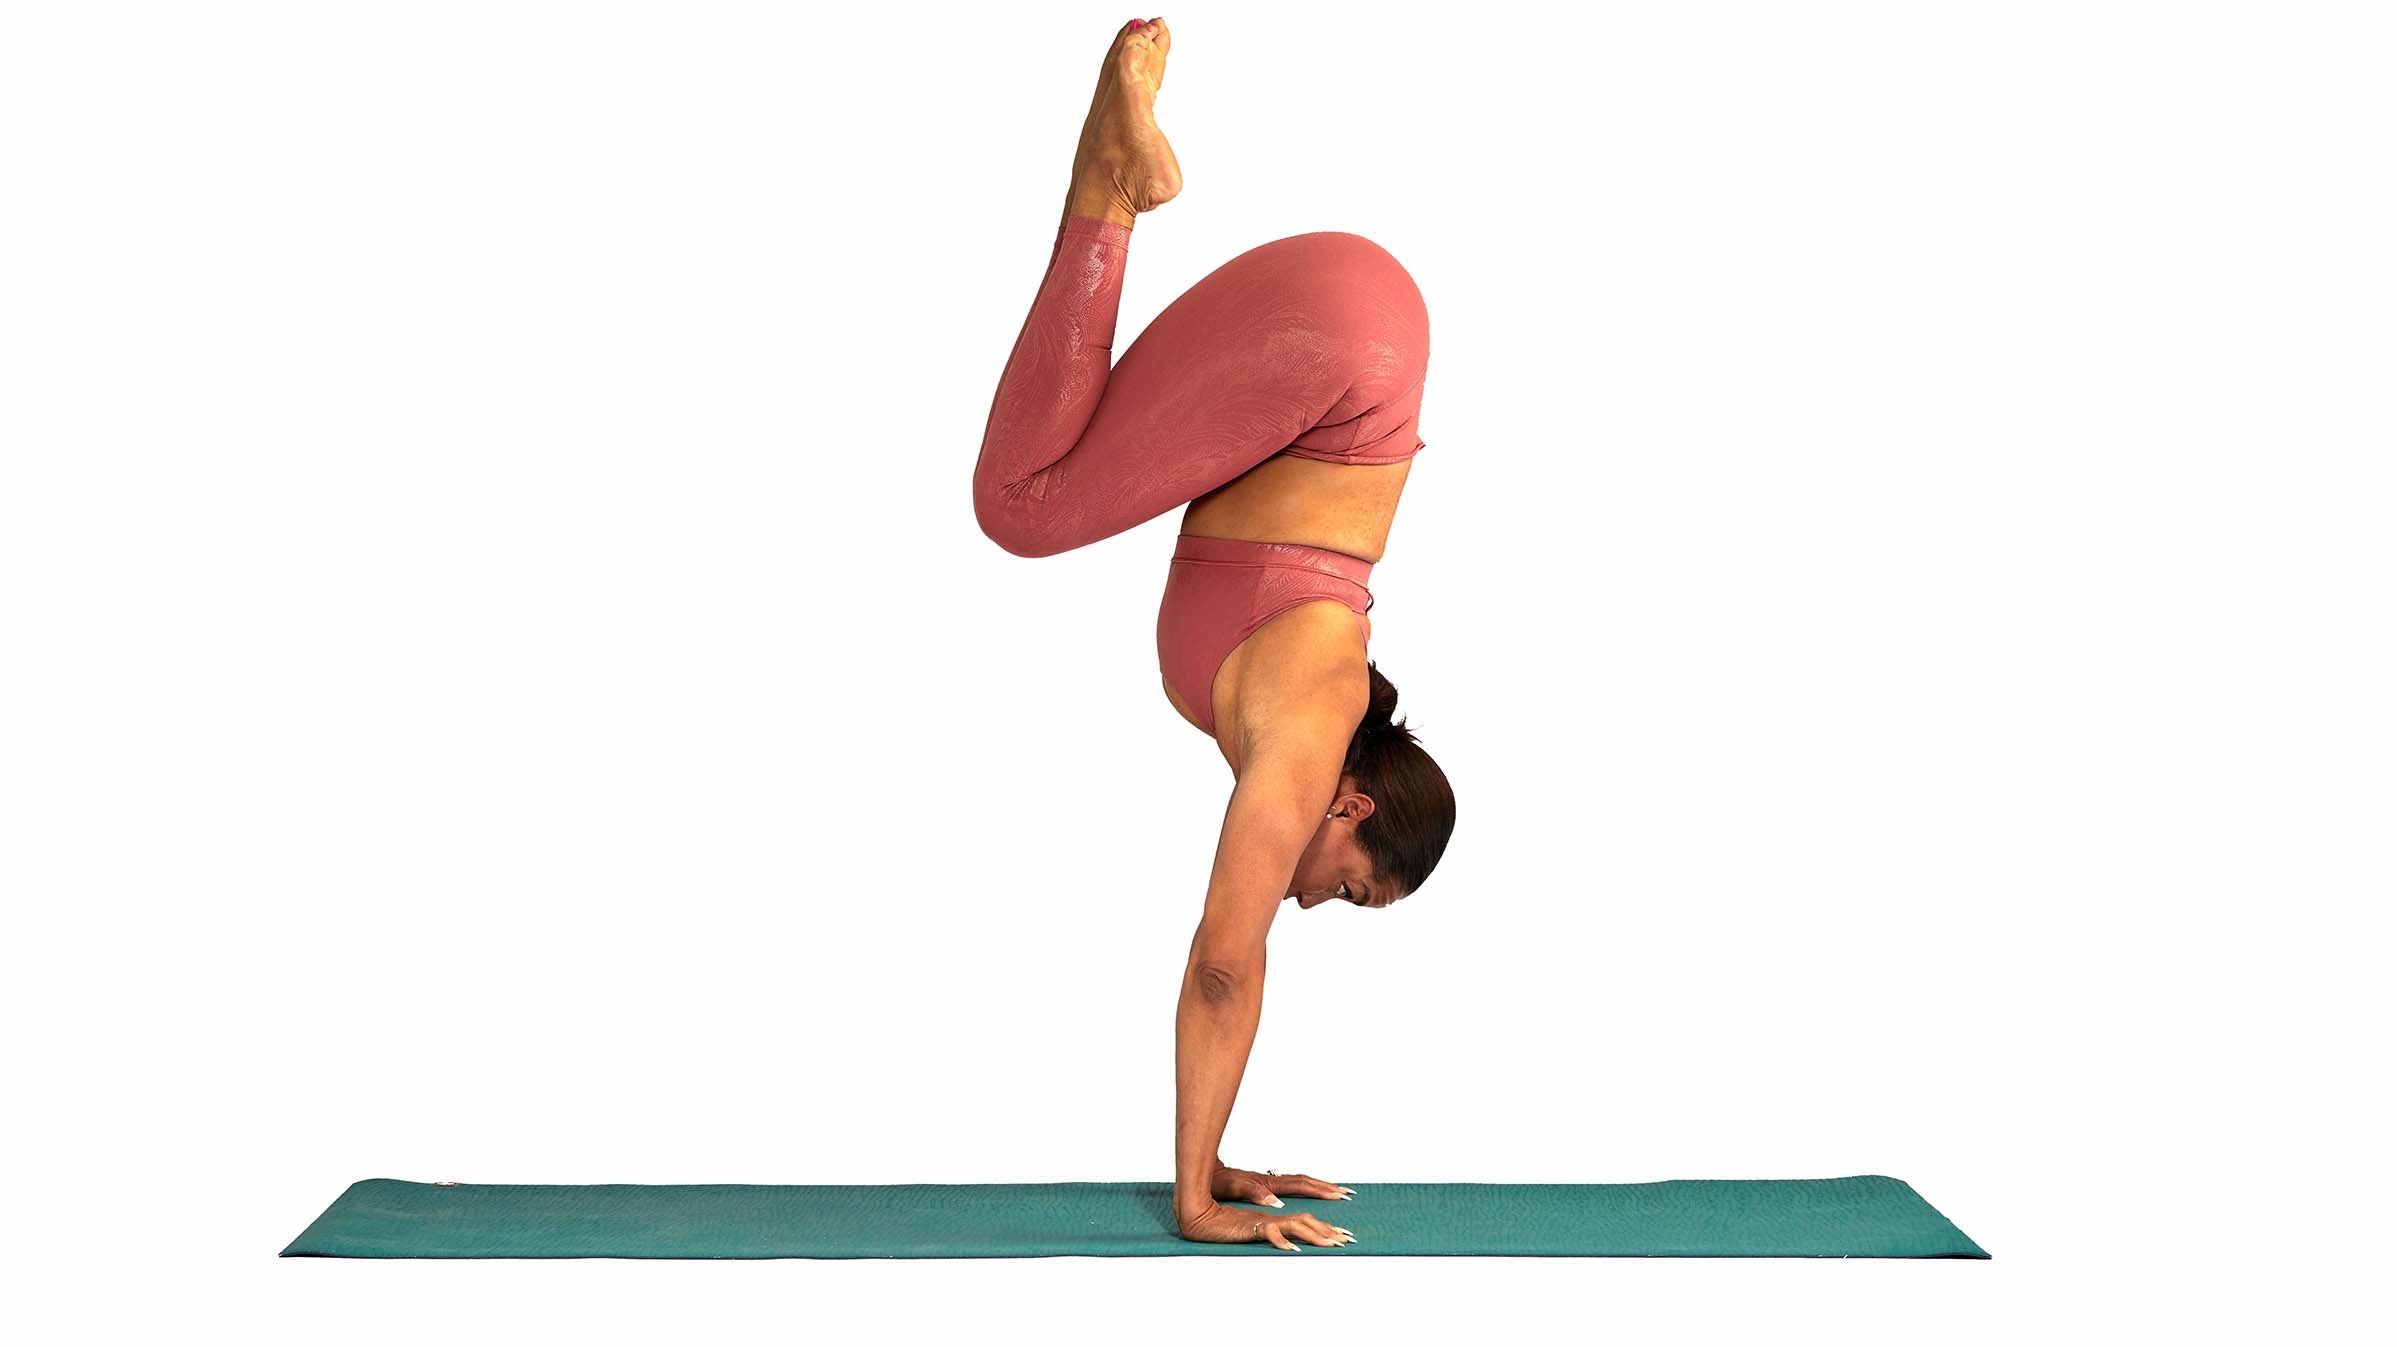 Handstand Yoga Pose Photos and Images | Shutterstock